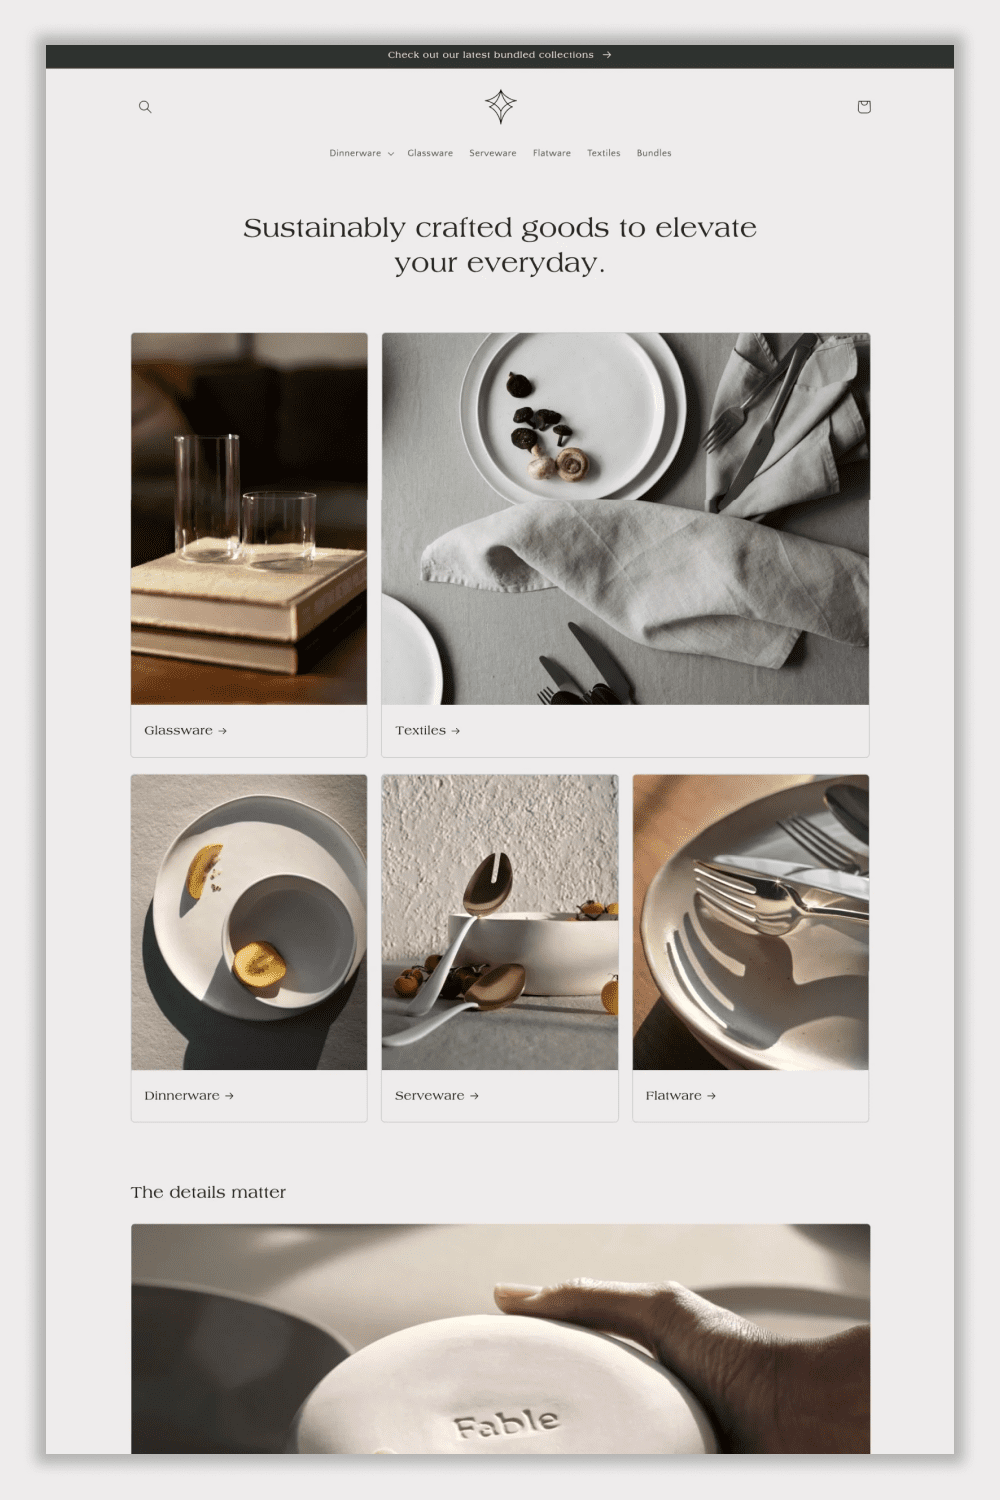 Screenshot of the main page of the online store with photos of dishes on the table.